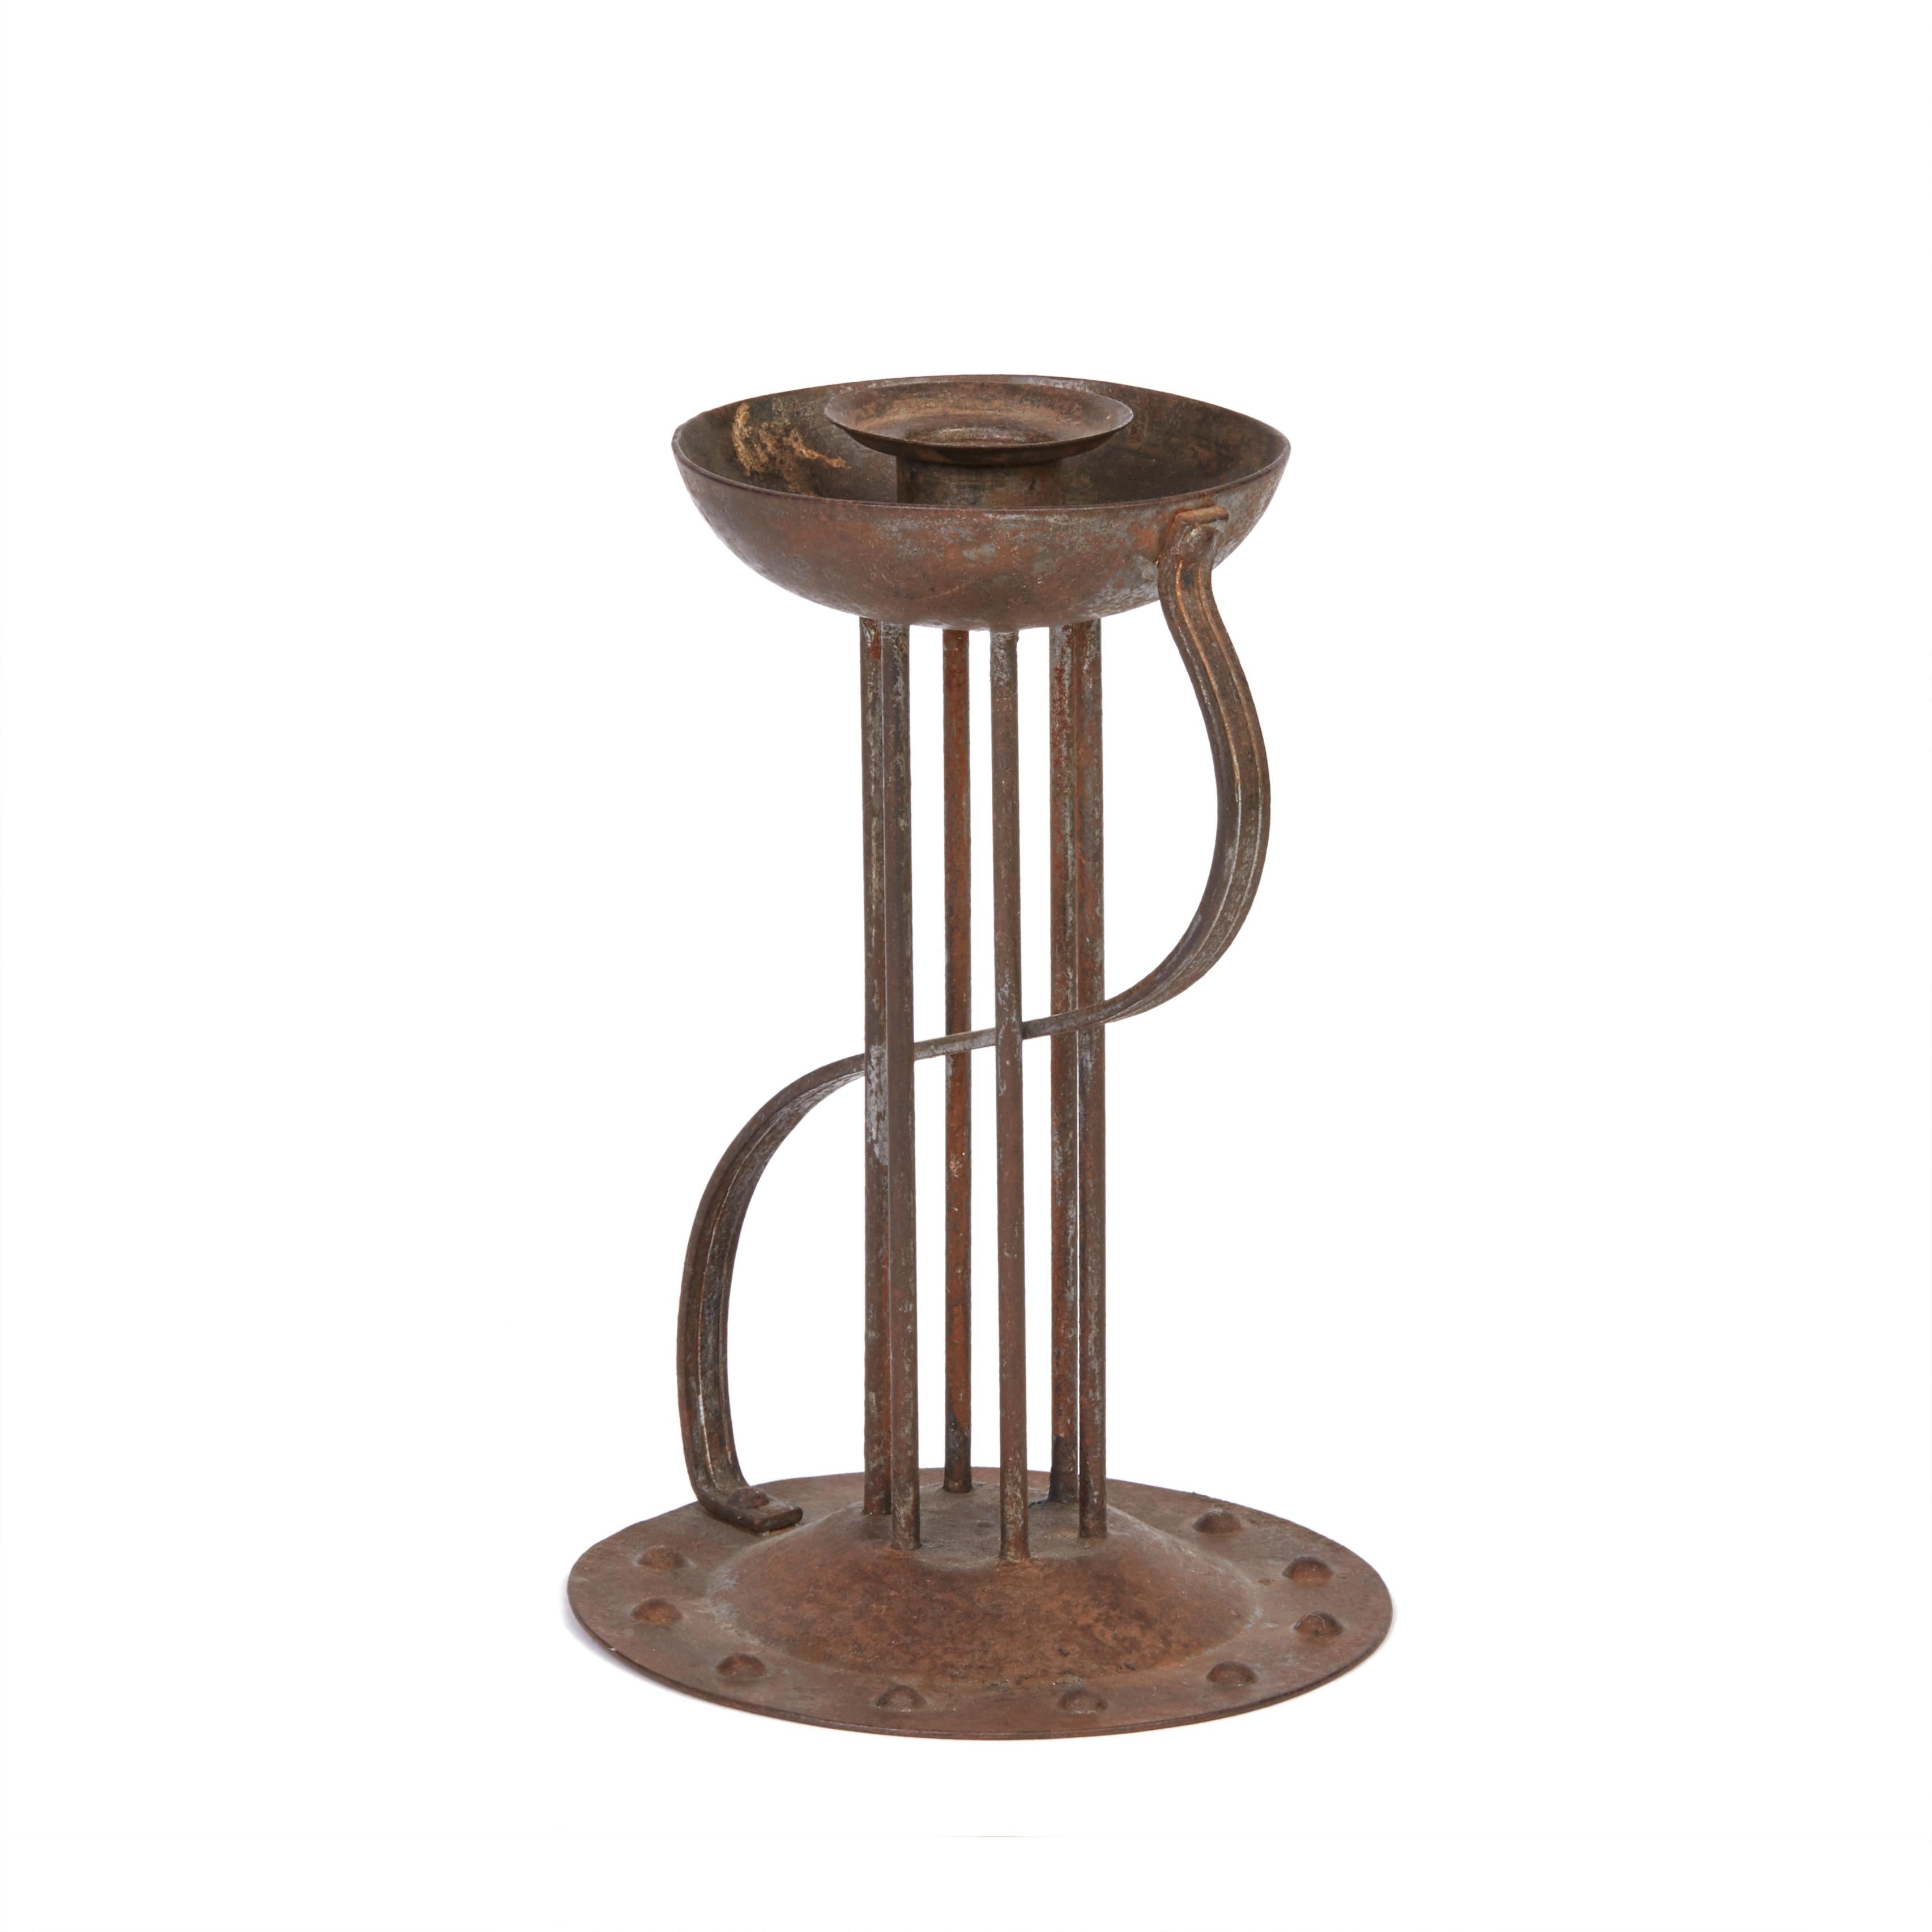 A stylish secessionist Industrial art iron candlestick or Chamberstick made and designed by Hugo bergère. As part of the Viennese secessionist movement the work of Hugo bergère was seen as cutting edge and was sold through a number of iconic outlets